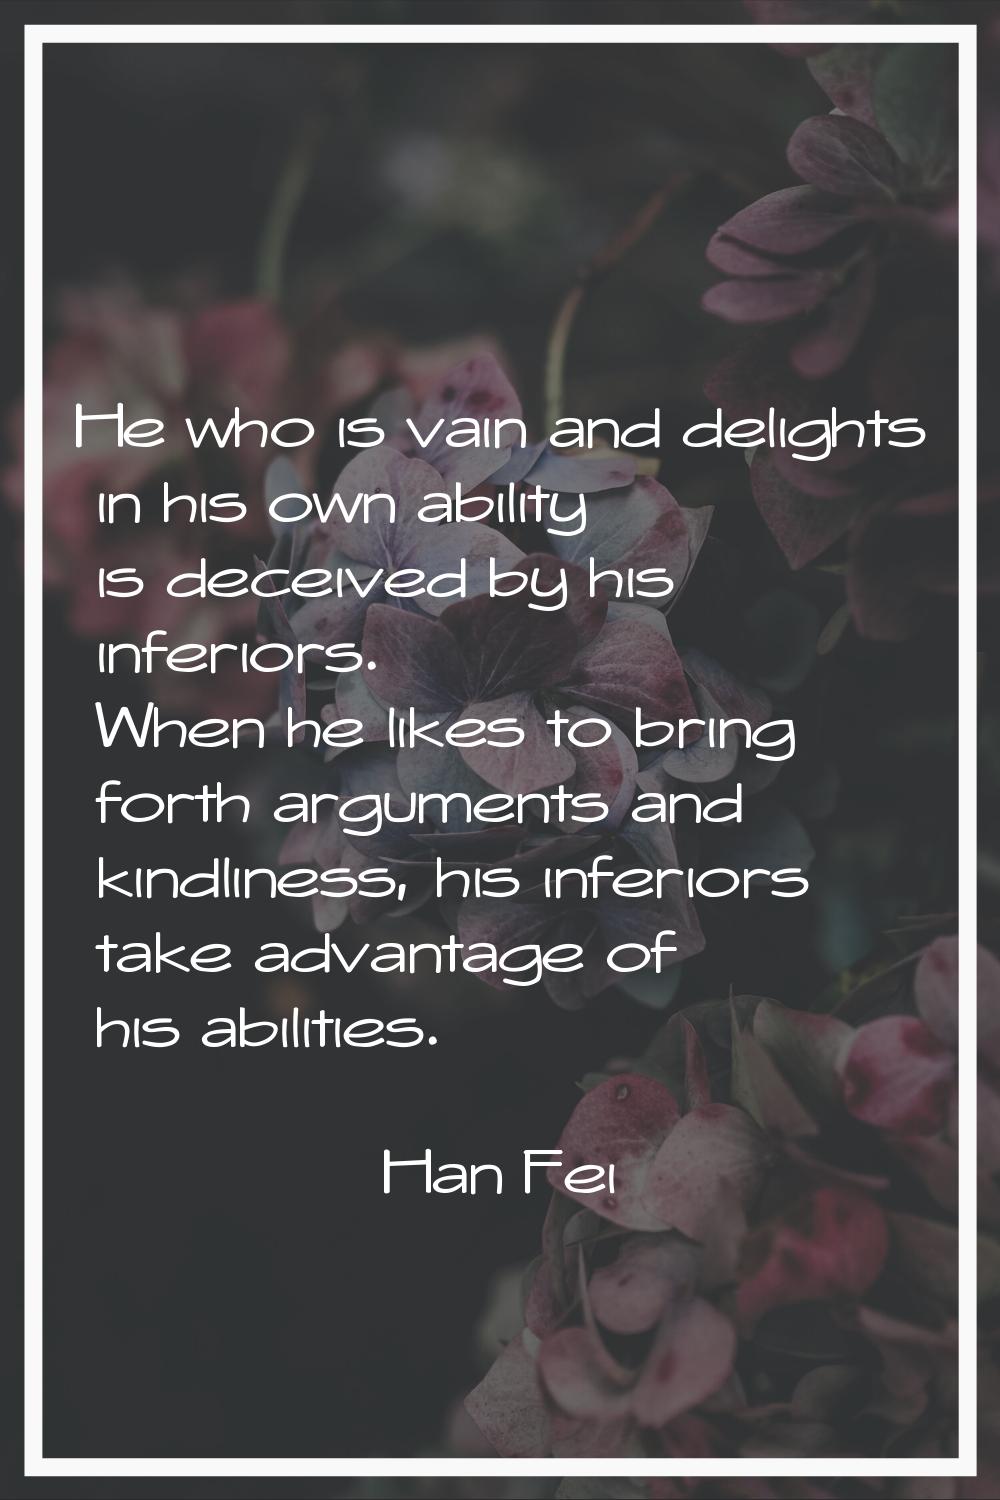 He who is vain and delights in his own ability is deceived by his inferiors. When he likes to bring